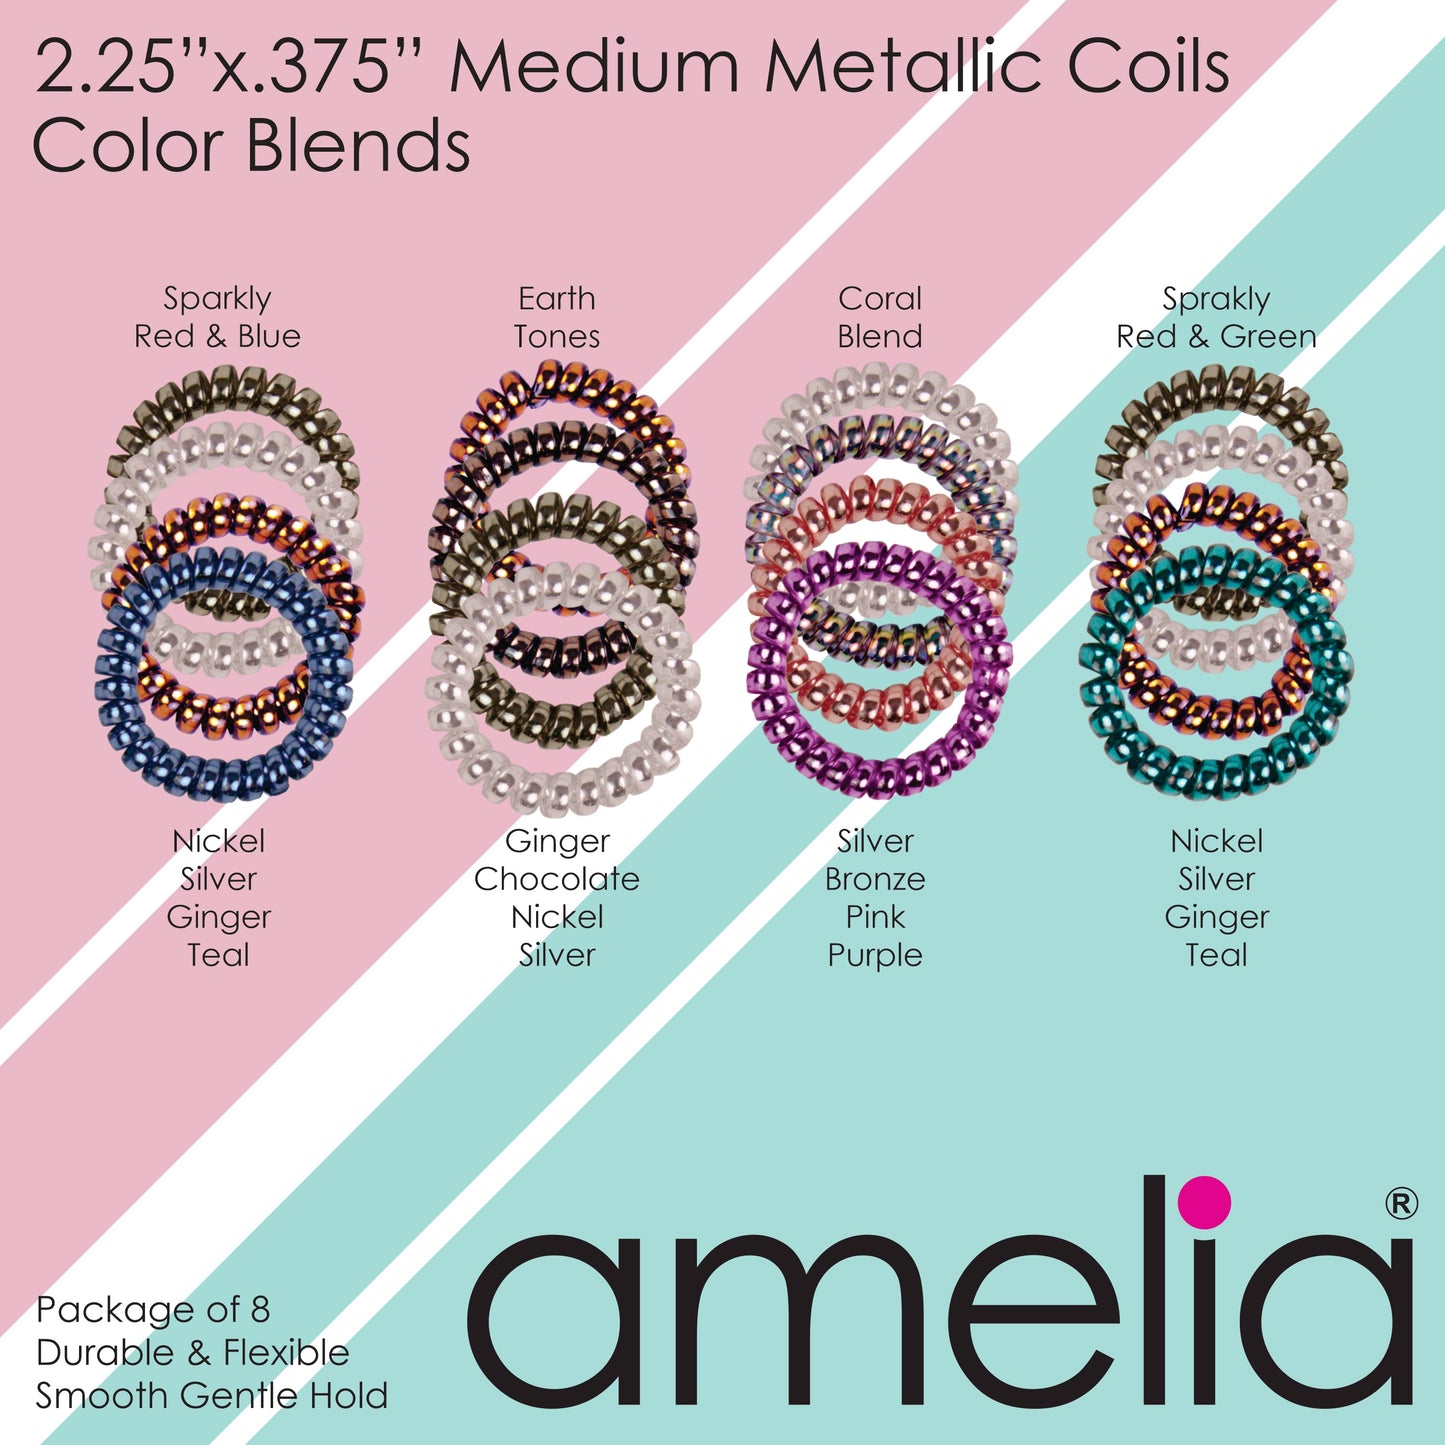 Amelia Beauty Products 8 Medium Smooth Elastic Hair Coils, 2.25in Diameter Spiral Hair Ties, Gentle on Hair, Strong Hold and Minimizes Dents and Creases, Ginger